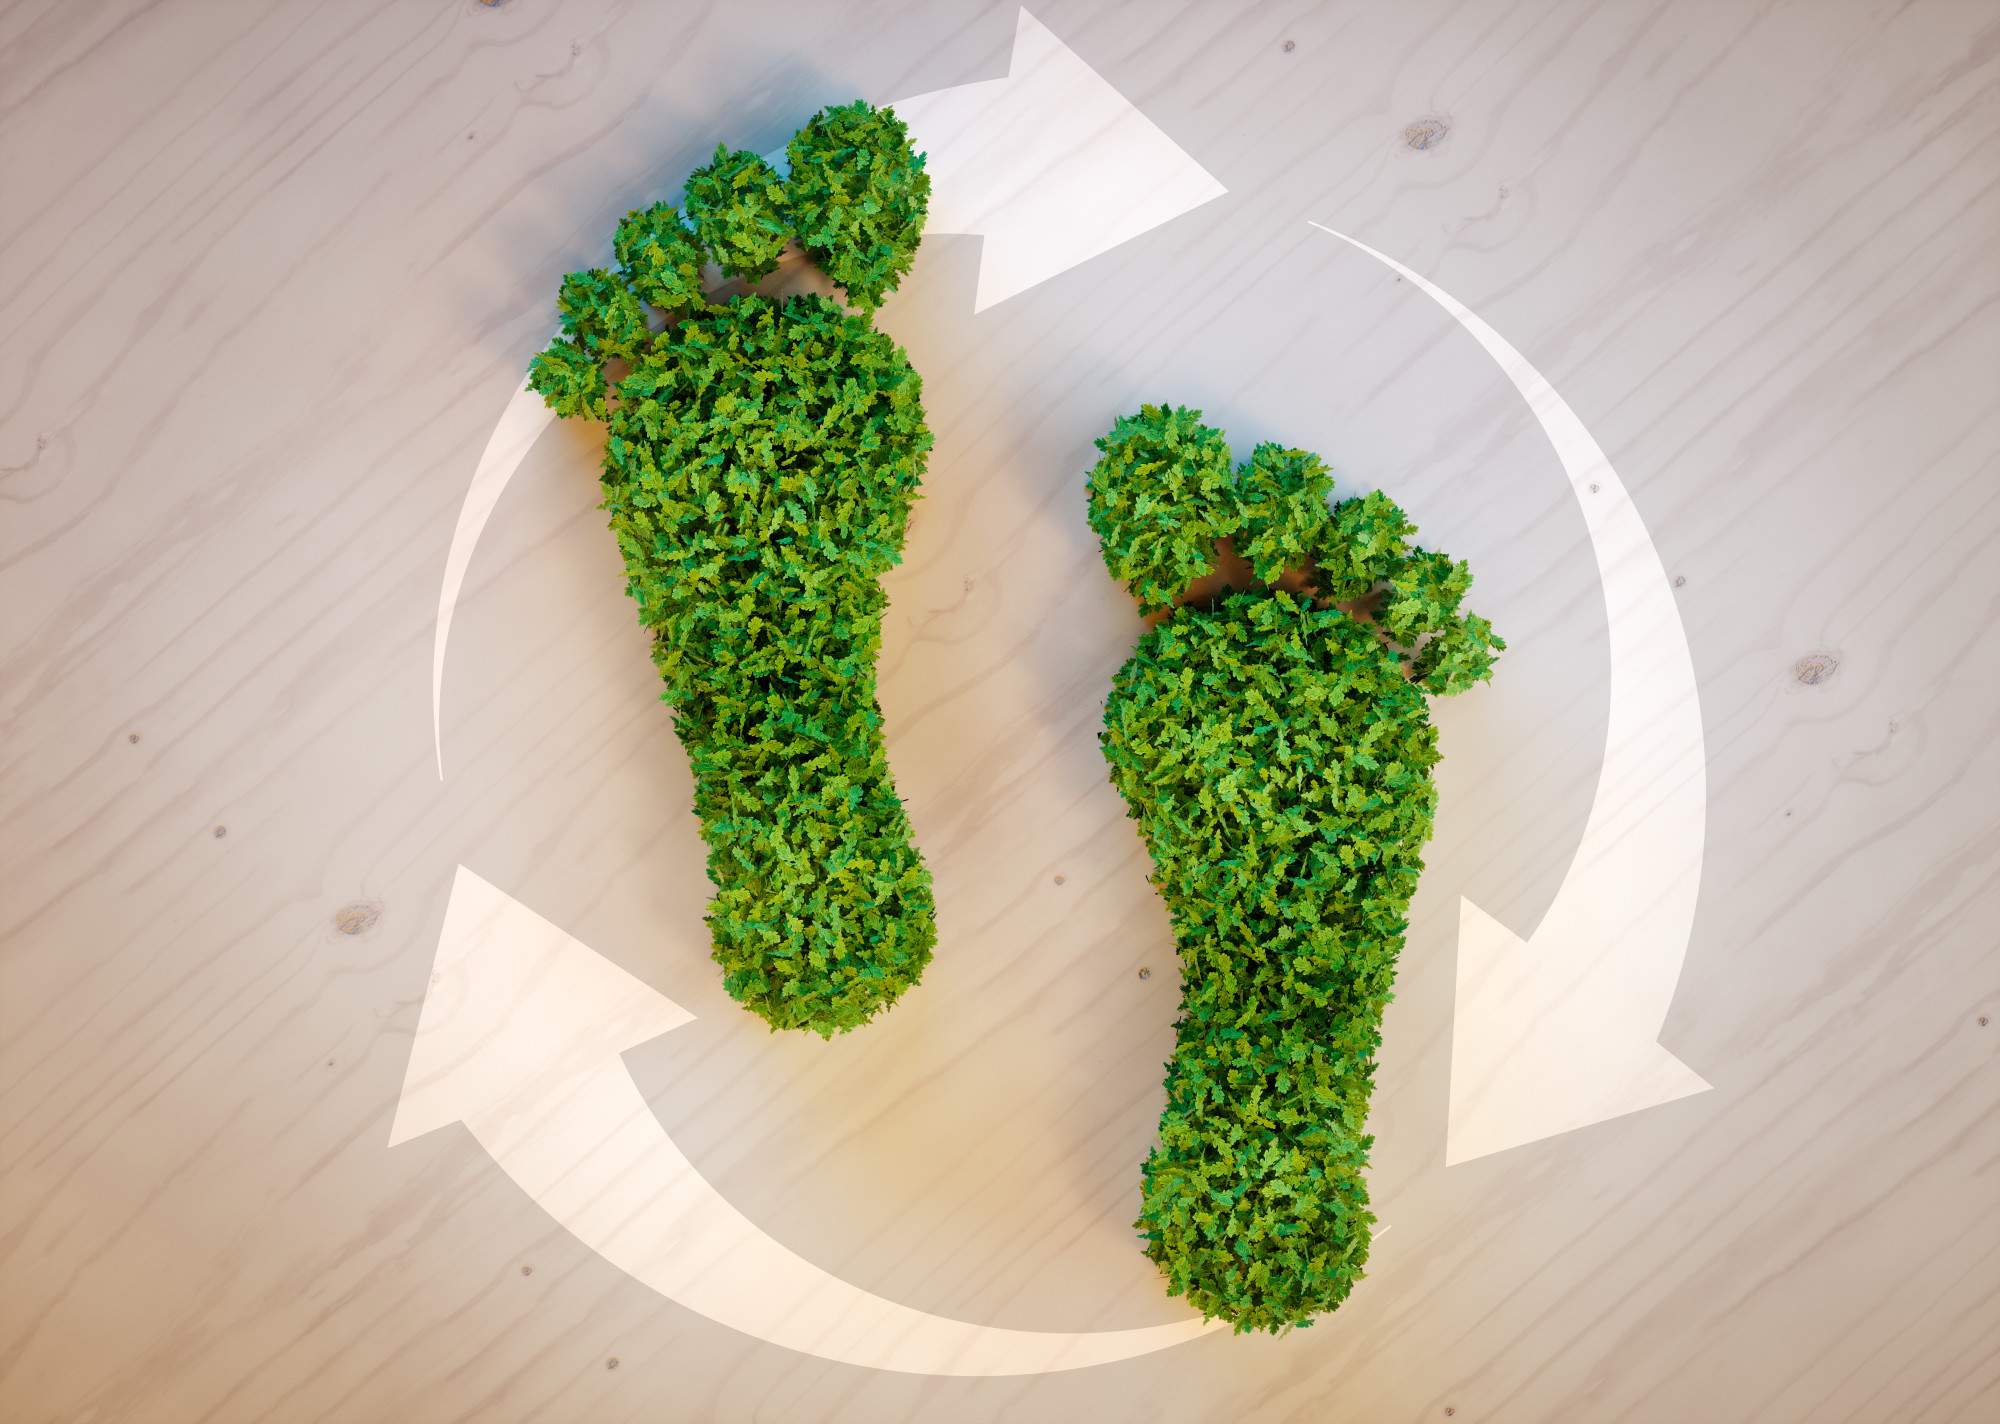 5 Ways to Significantly Reduce Your Carbon Footprint